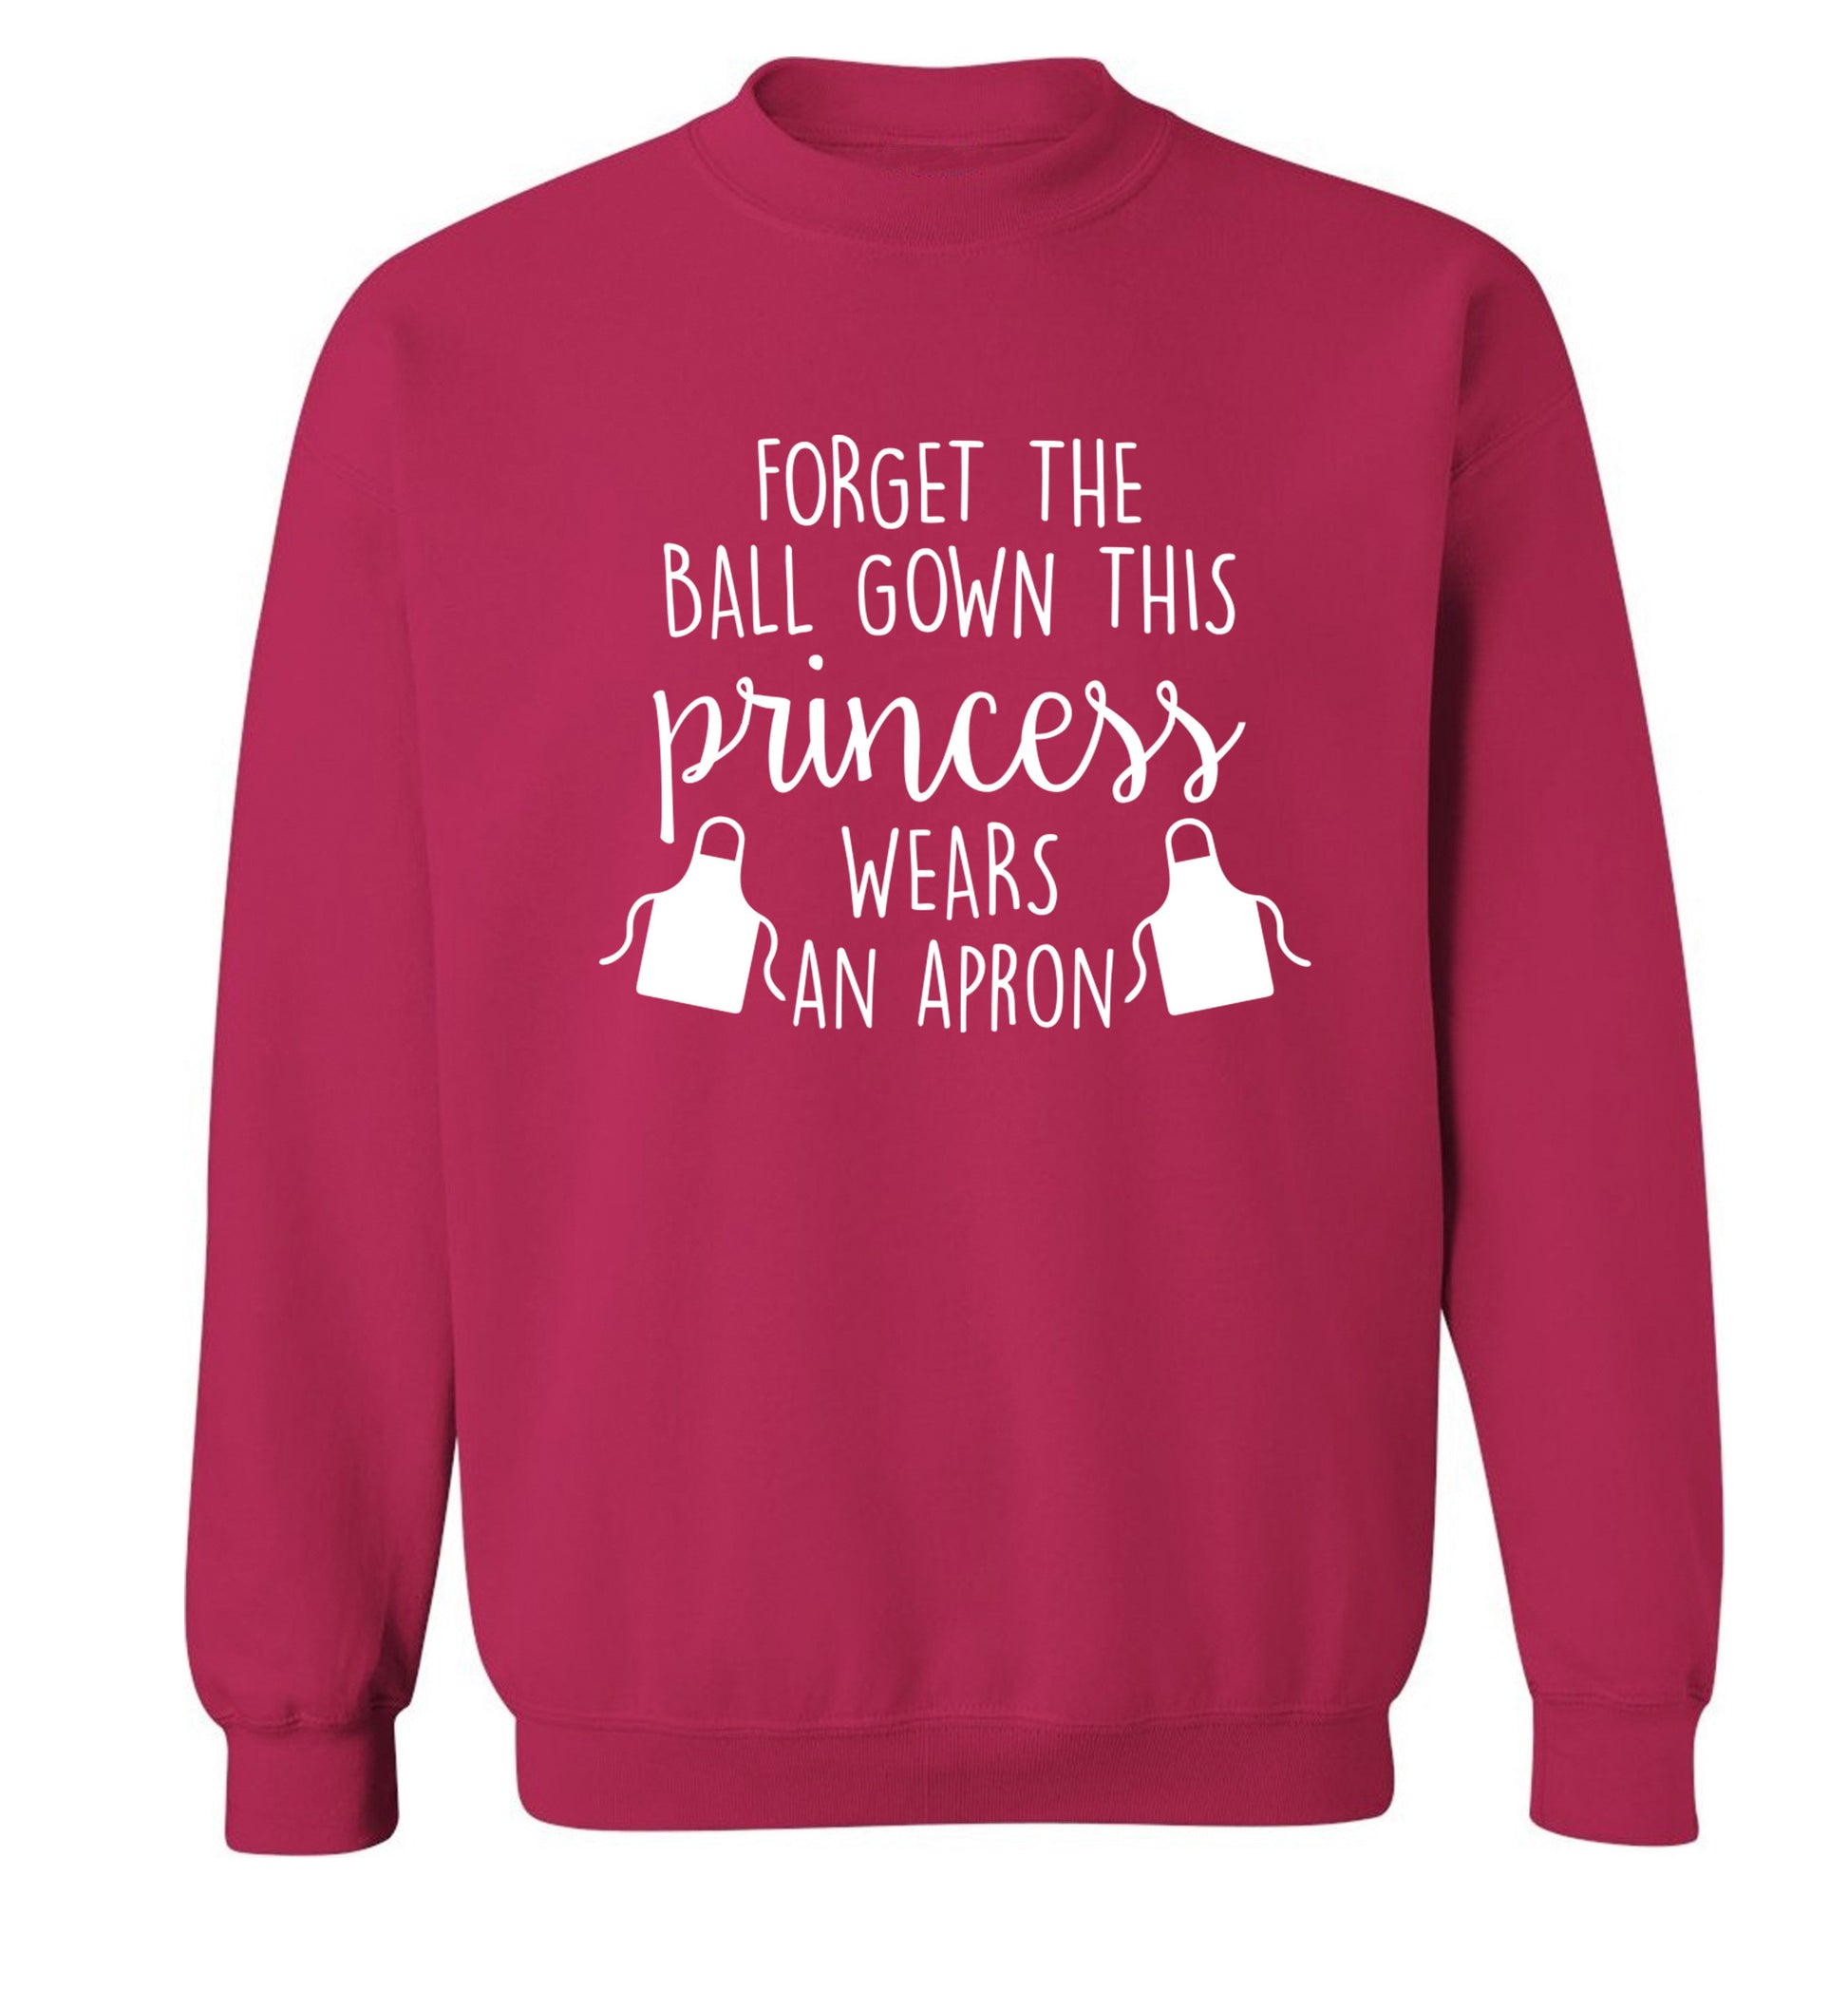 Forget the ball gown this princess wears an apron Adult's unisex pink Sweater 2XL